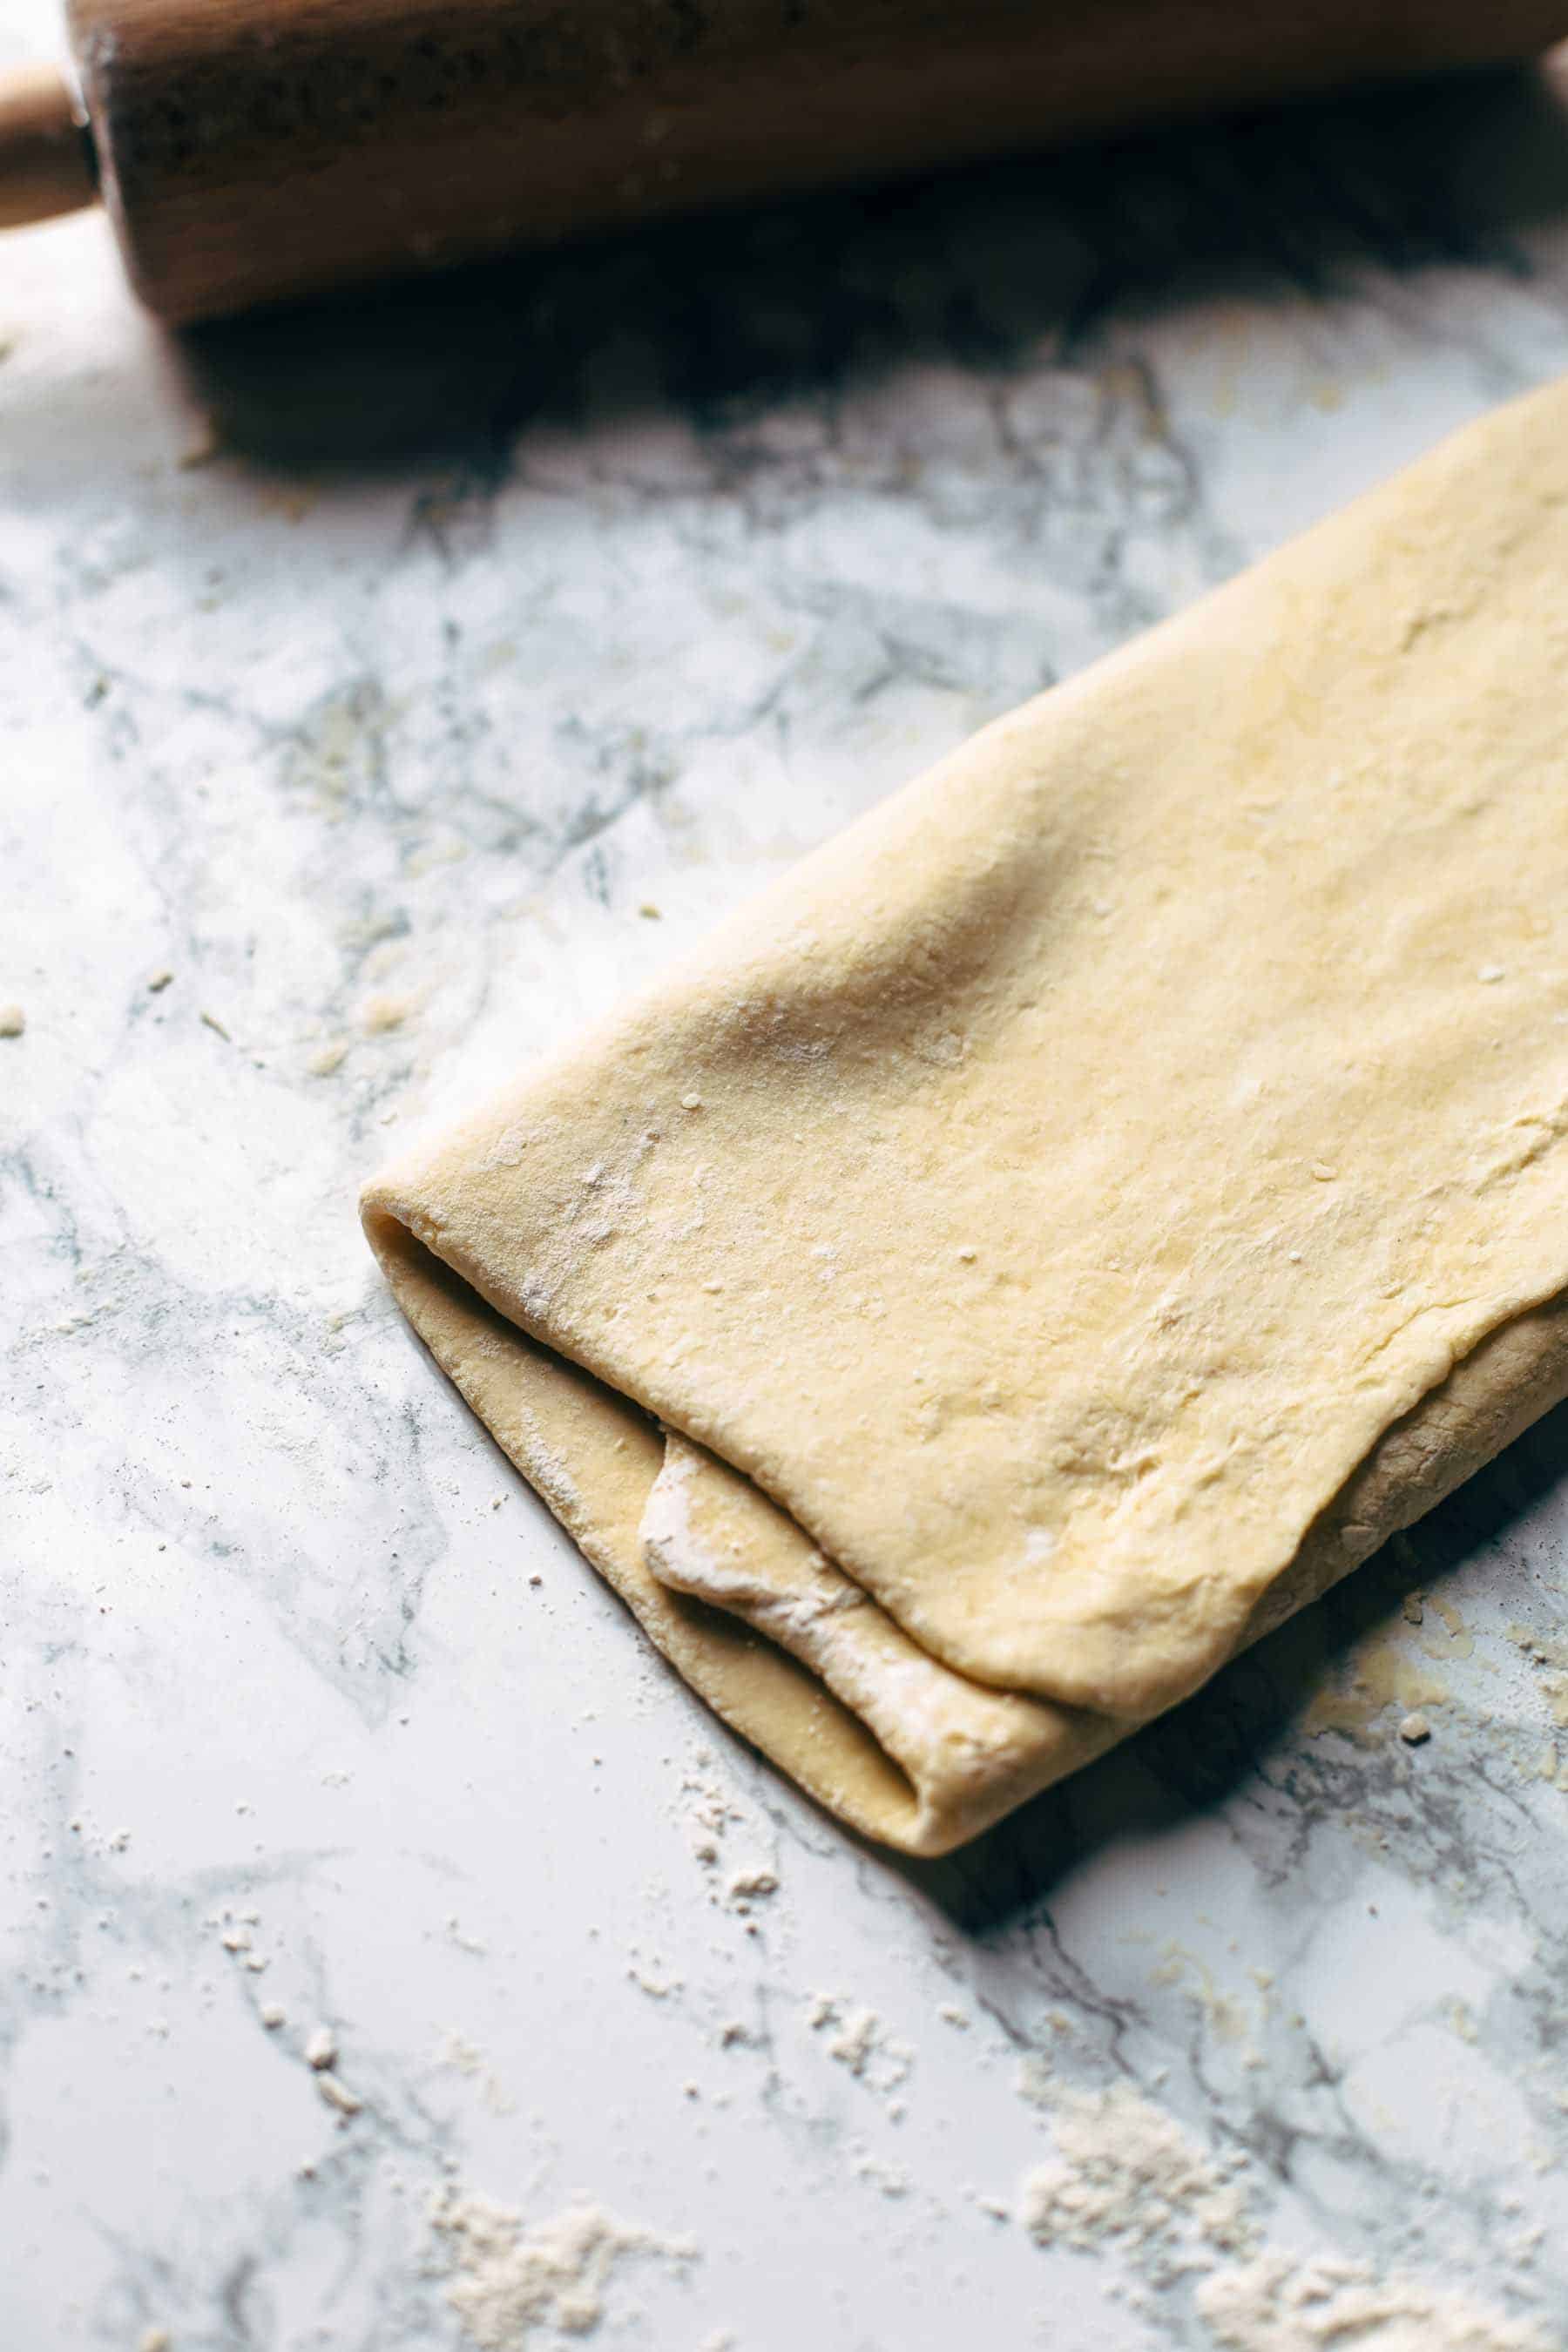 Rolled pie crust that is folded like a business letter